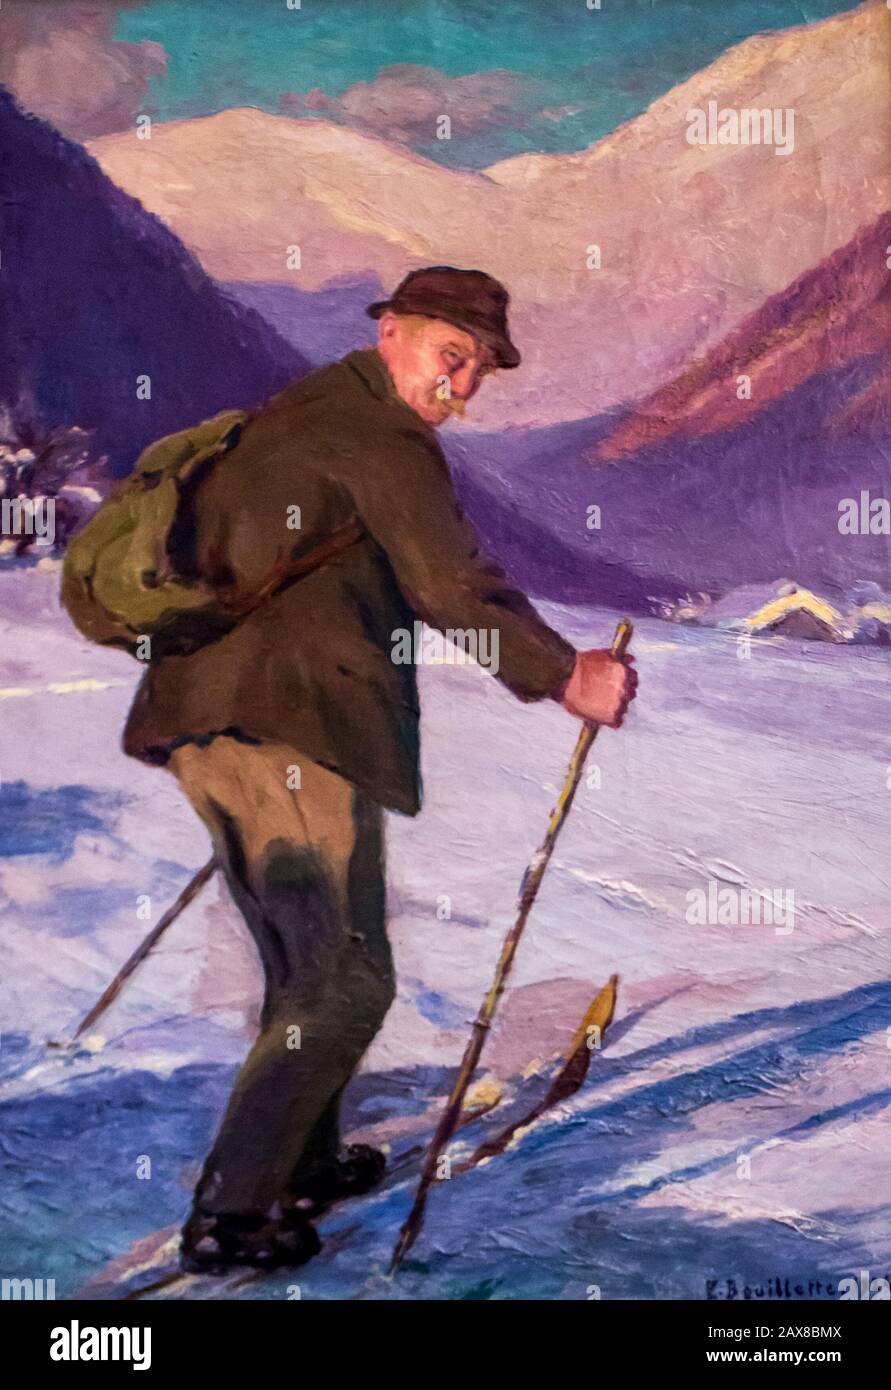 Musée Alpin Chamonix : Joseph RAVANEL 'Le Rouge' in 1924,painting by Edgard BOUILLETTE (1872-1960).RAVANEL made the first ski crossing between Chamonix and Zermatt in 1903 with Dr. Michel PAYOT Stock Photo